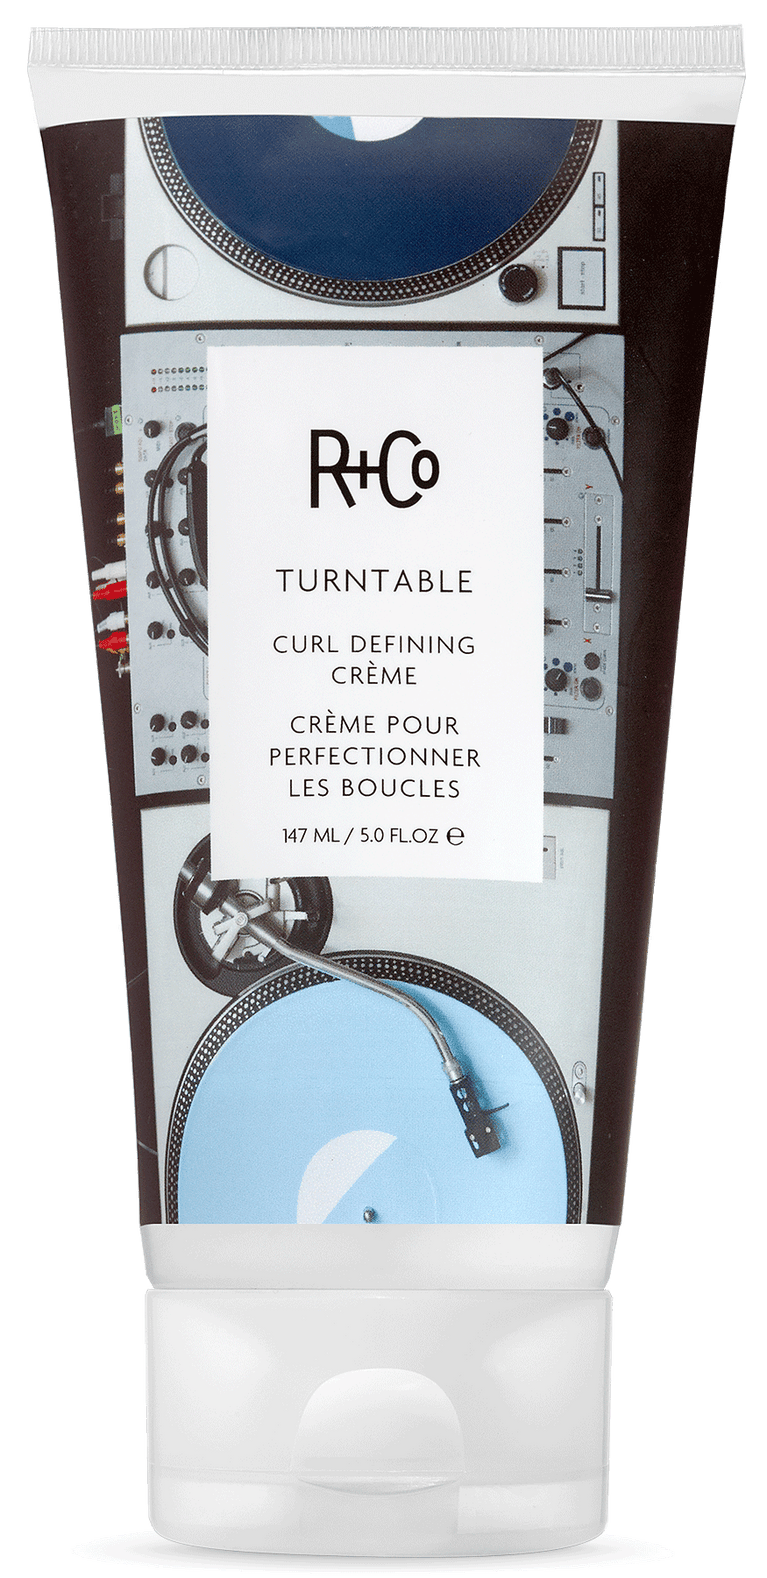 R+CO Turntable Curle Defining Creame 147ml